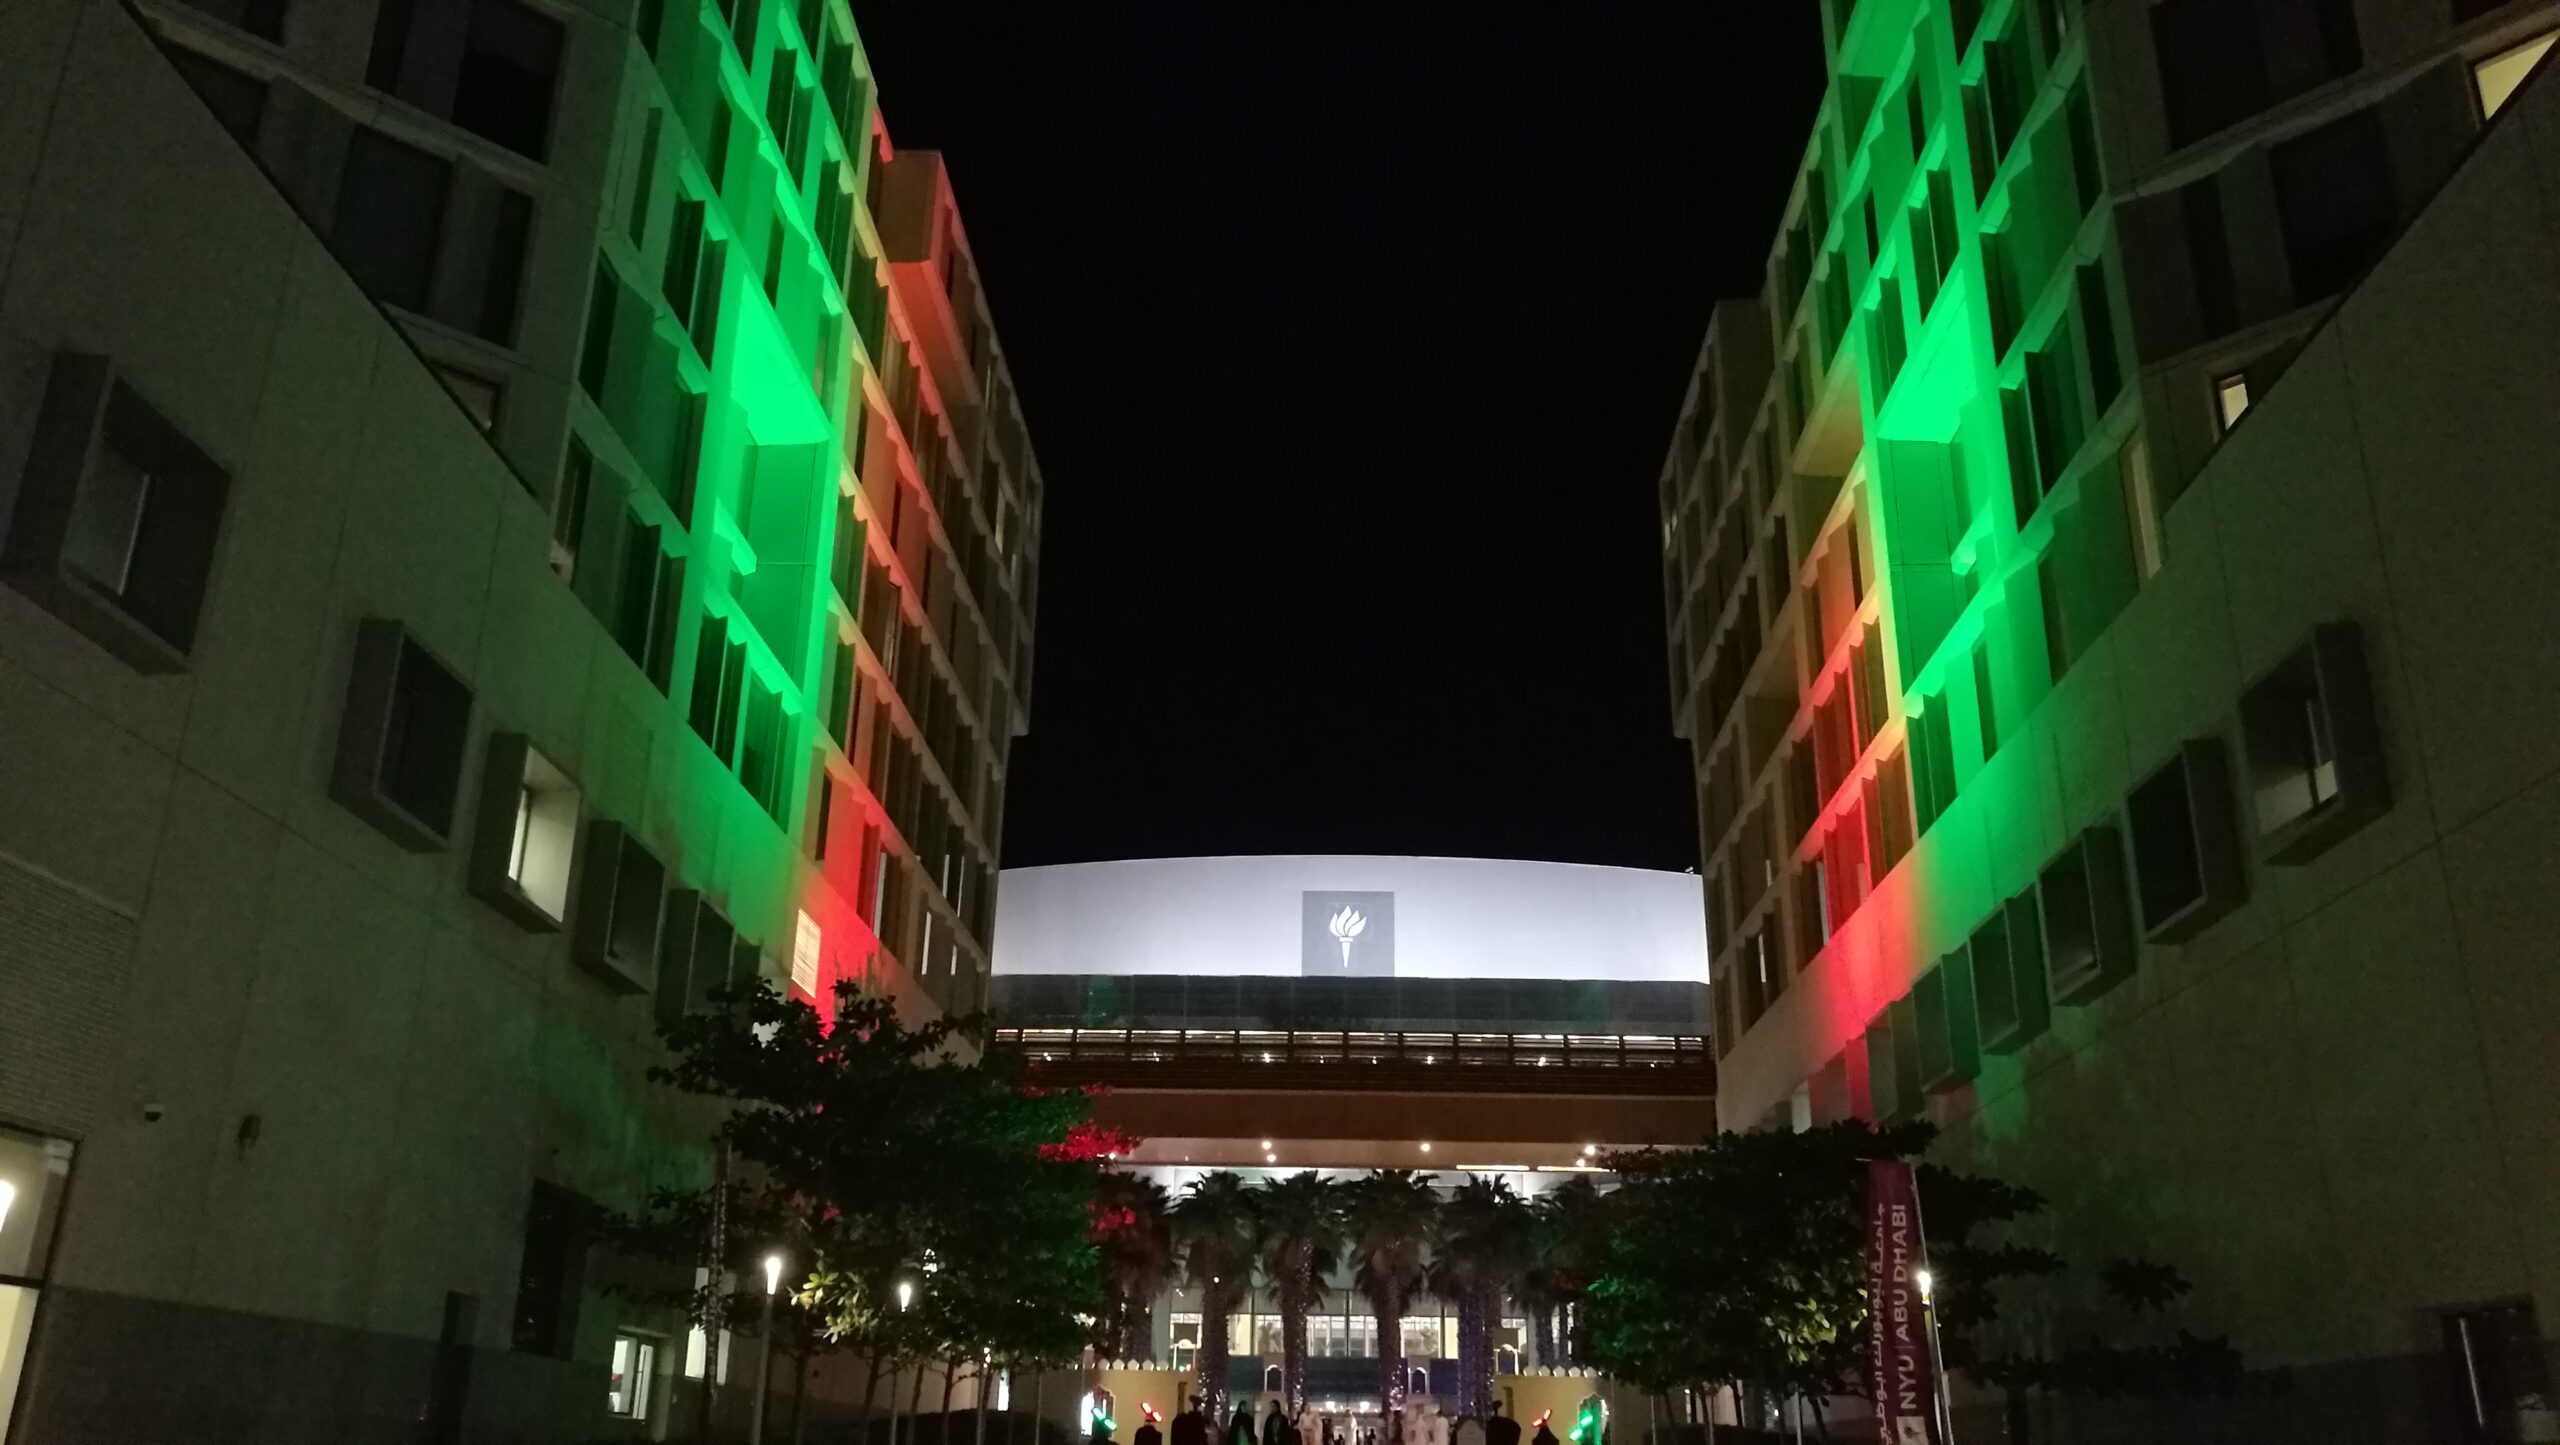 The NYU Abu Dhabi campus buildings lit up in red and green for UAE National Day.